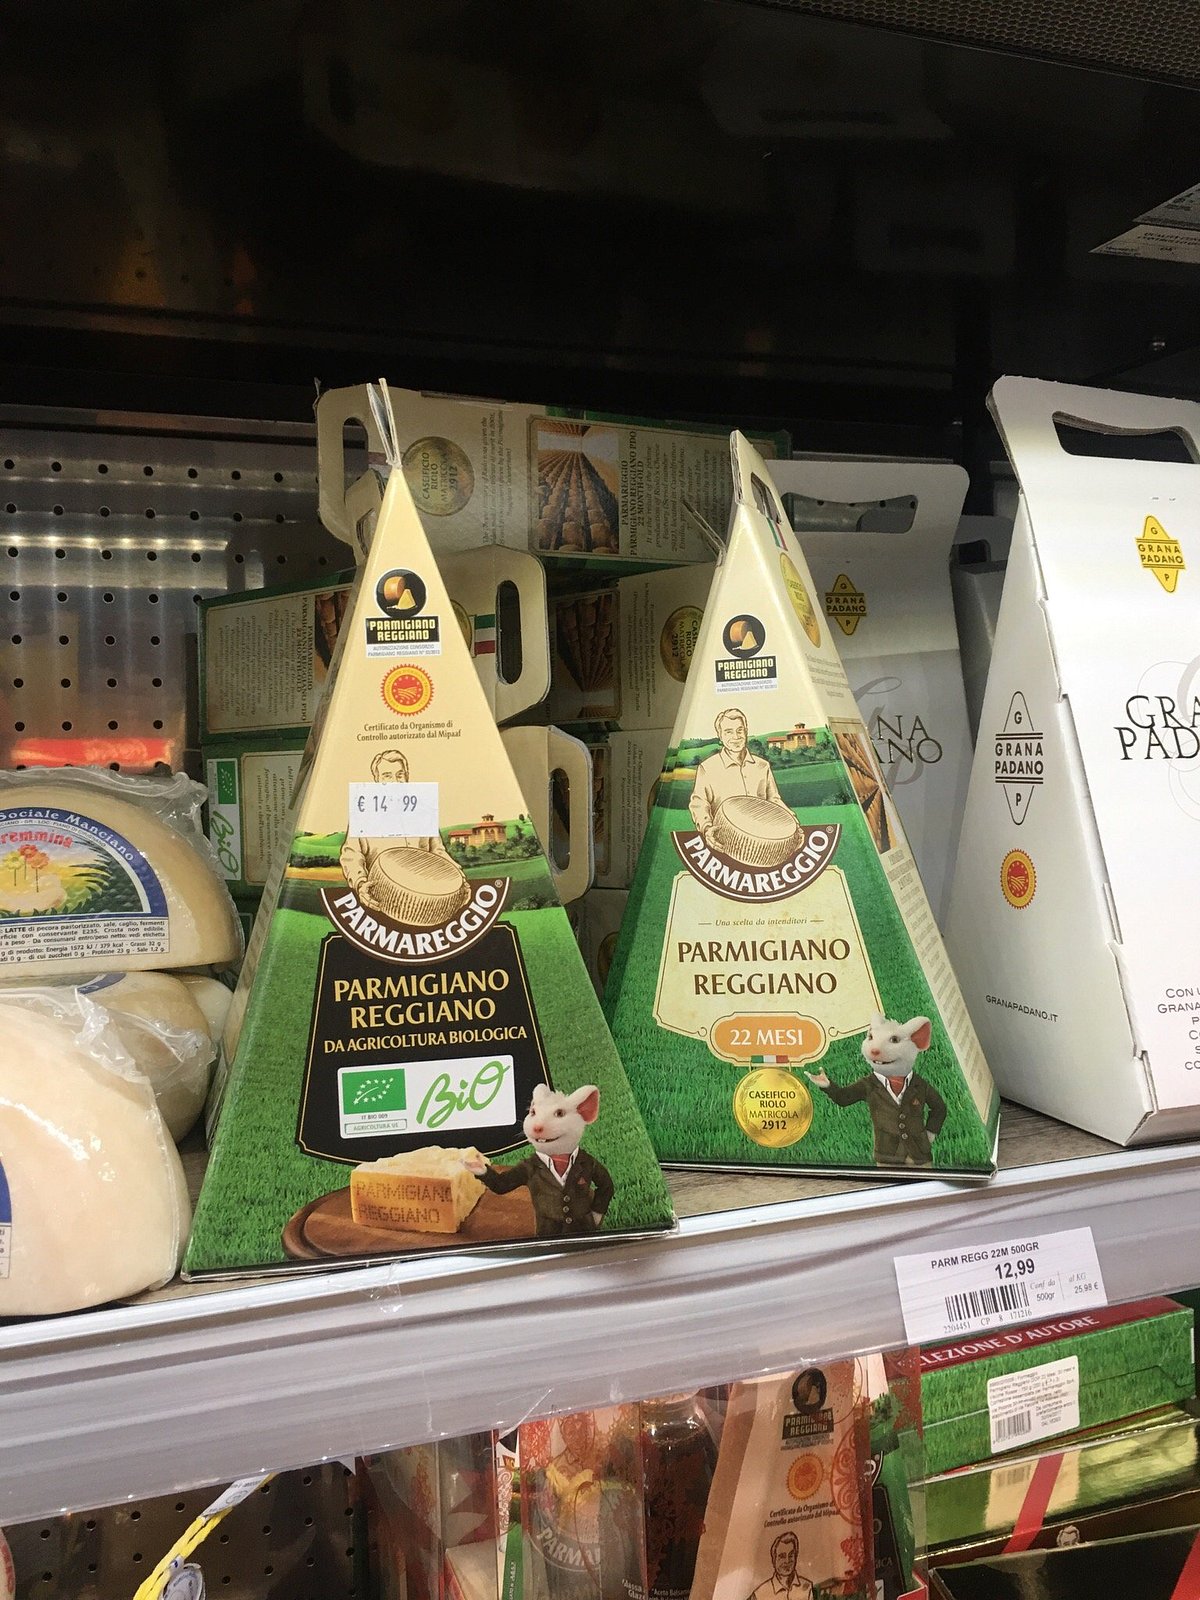 Fromage triangle fondant CARREFOUR CLASSIC